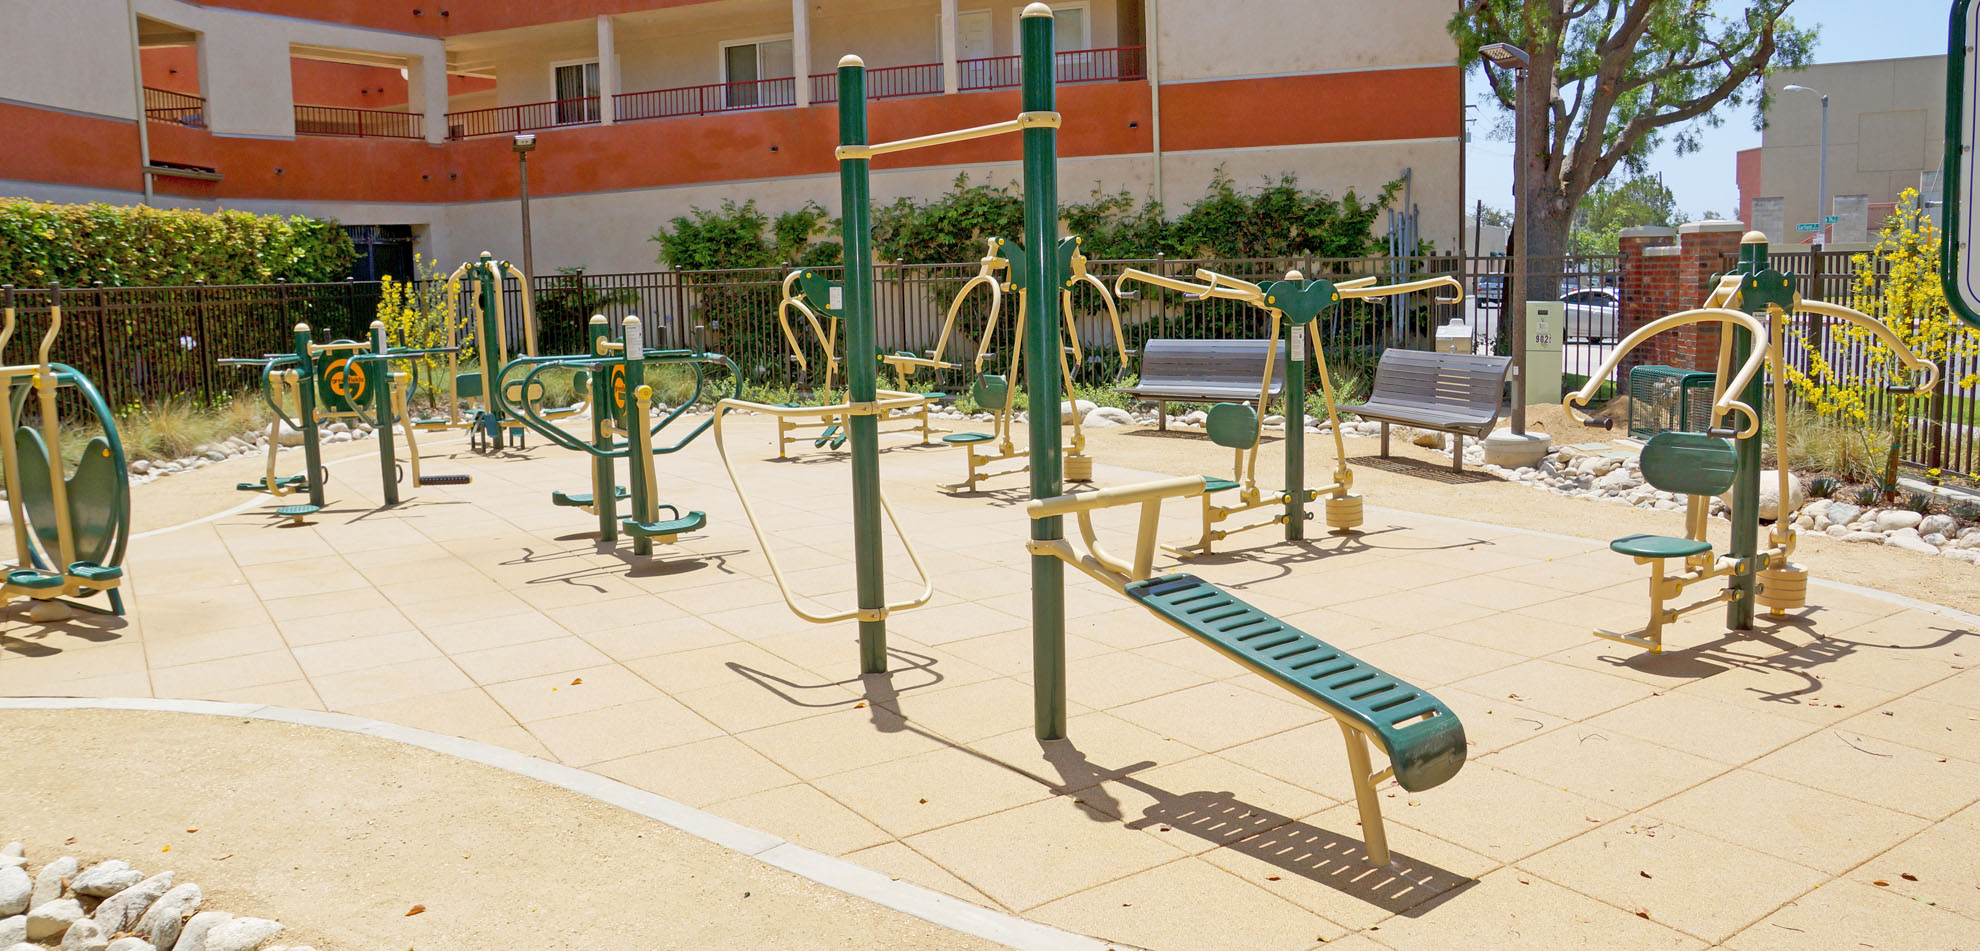 Outdoor exercise equipment at Garfield Exercise Park